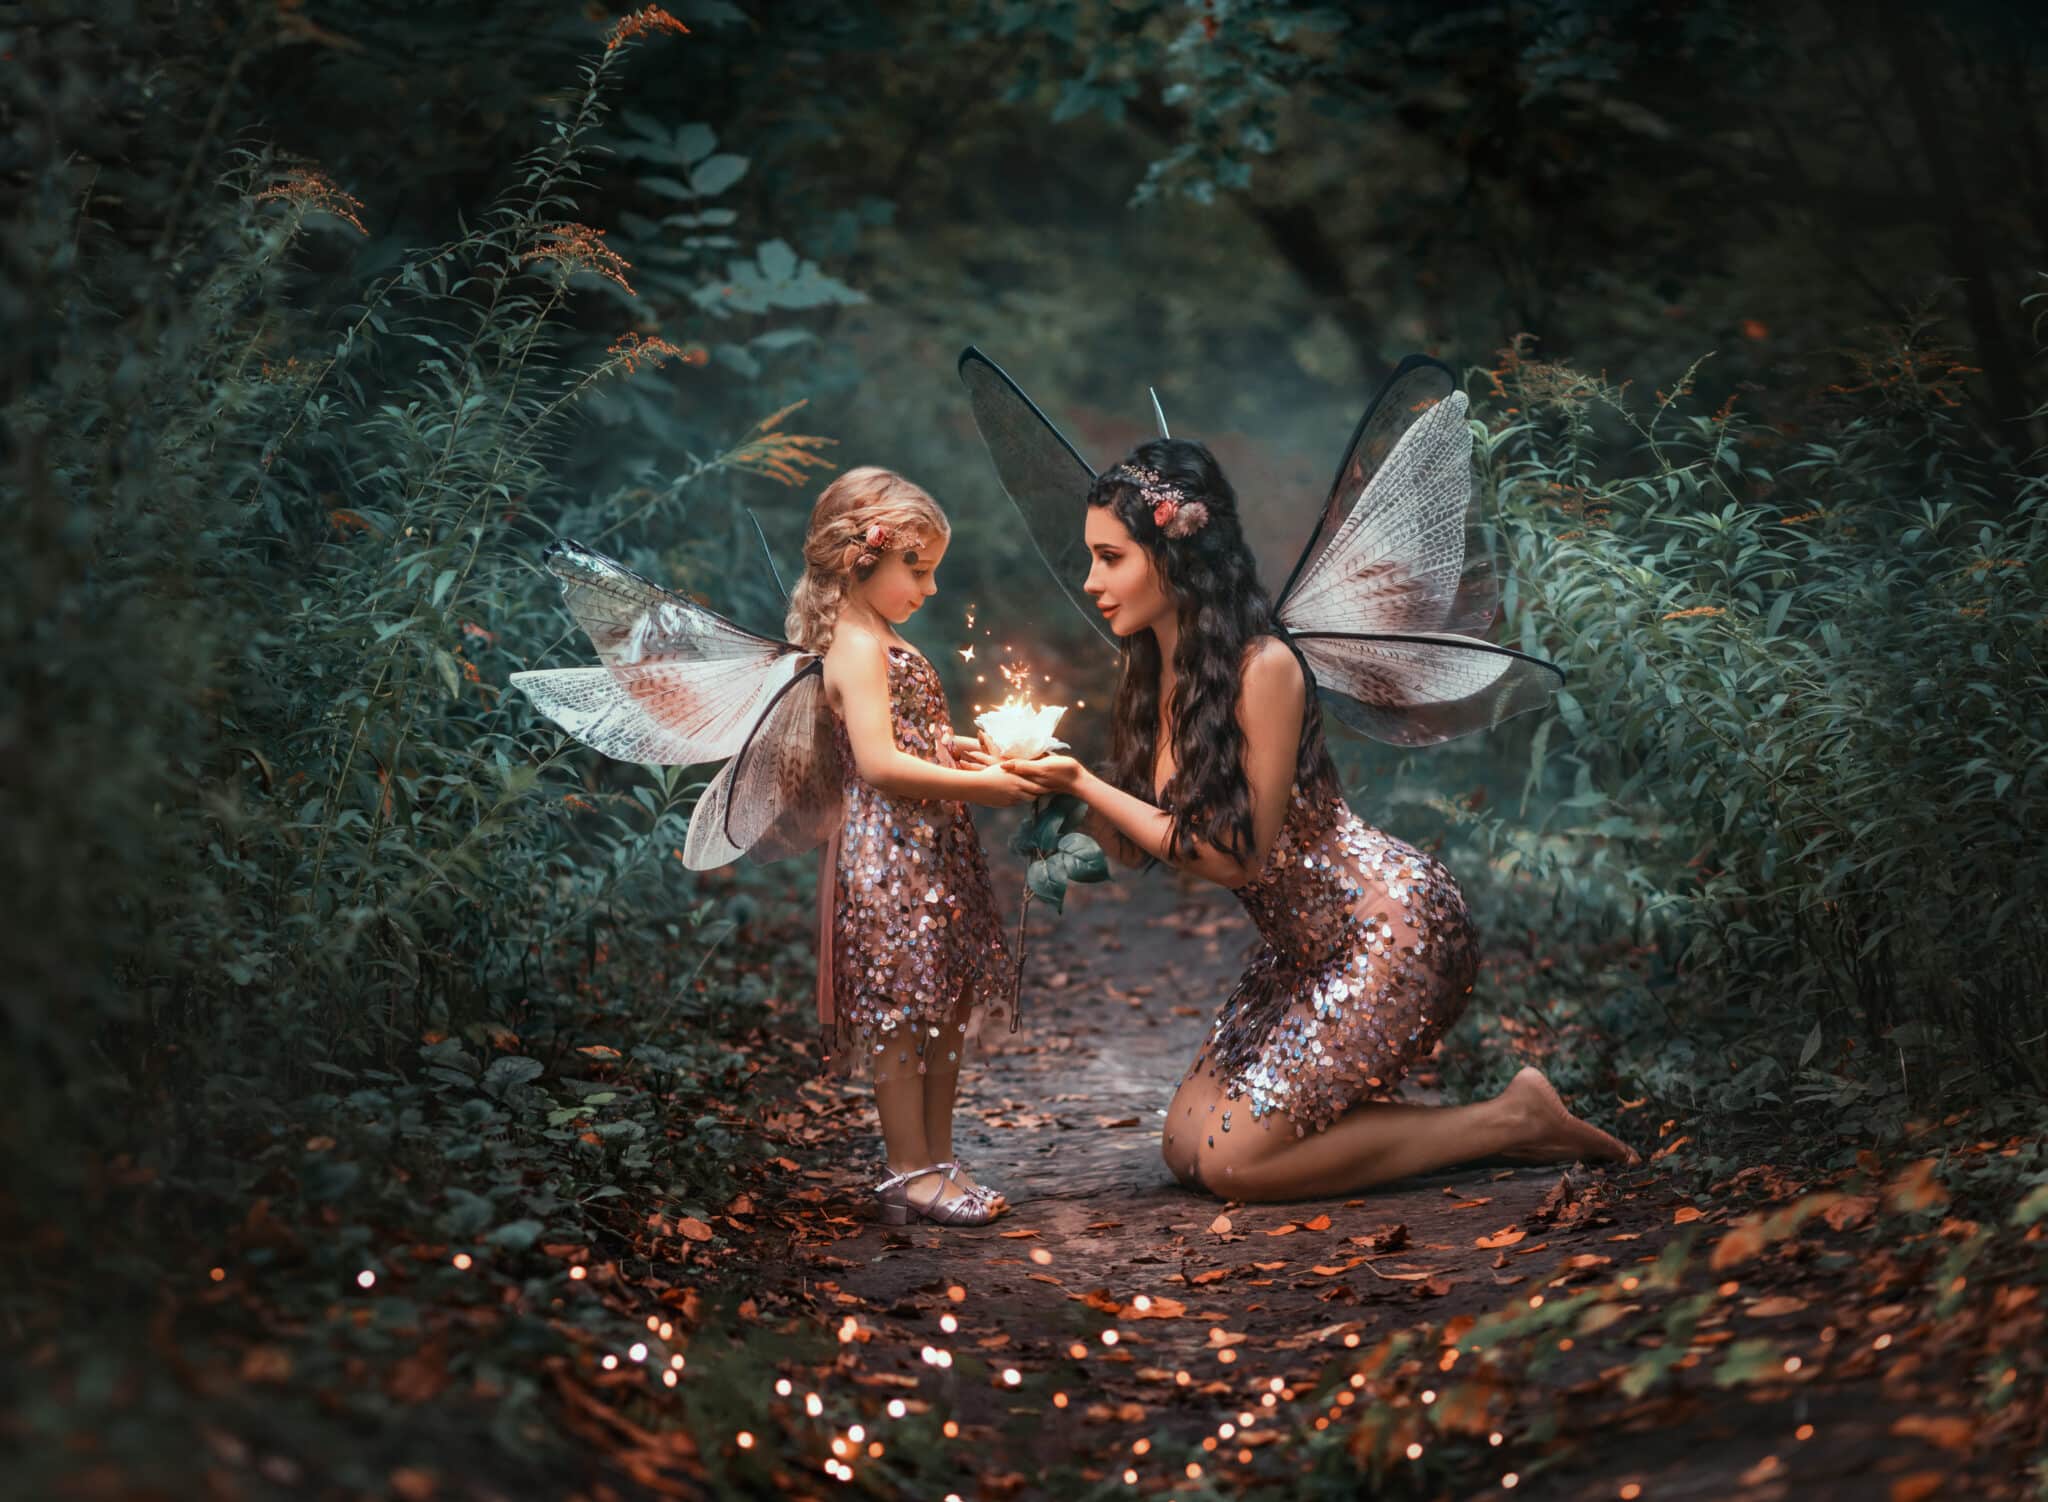 fantasy fairy woman mom gives magic light glowing flower to little happy pixie girl. Dark night summer green forest trees. Butterfly costume pink dress.